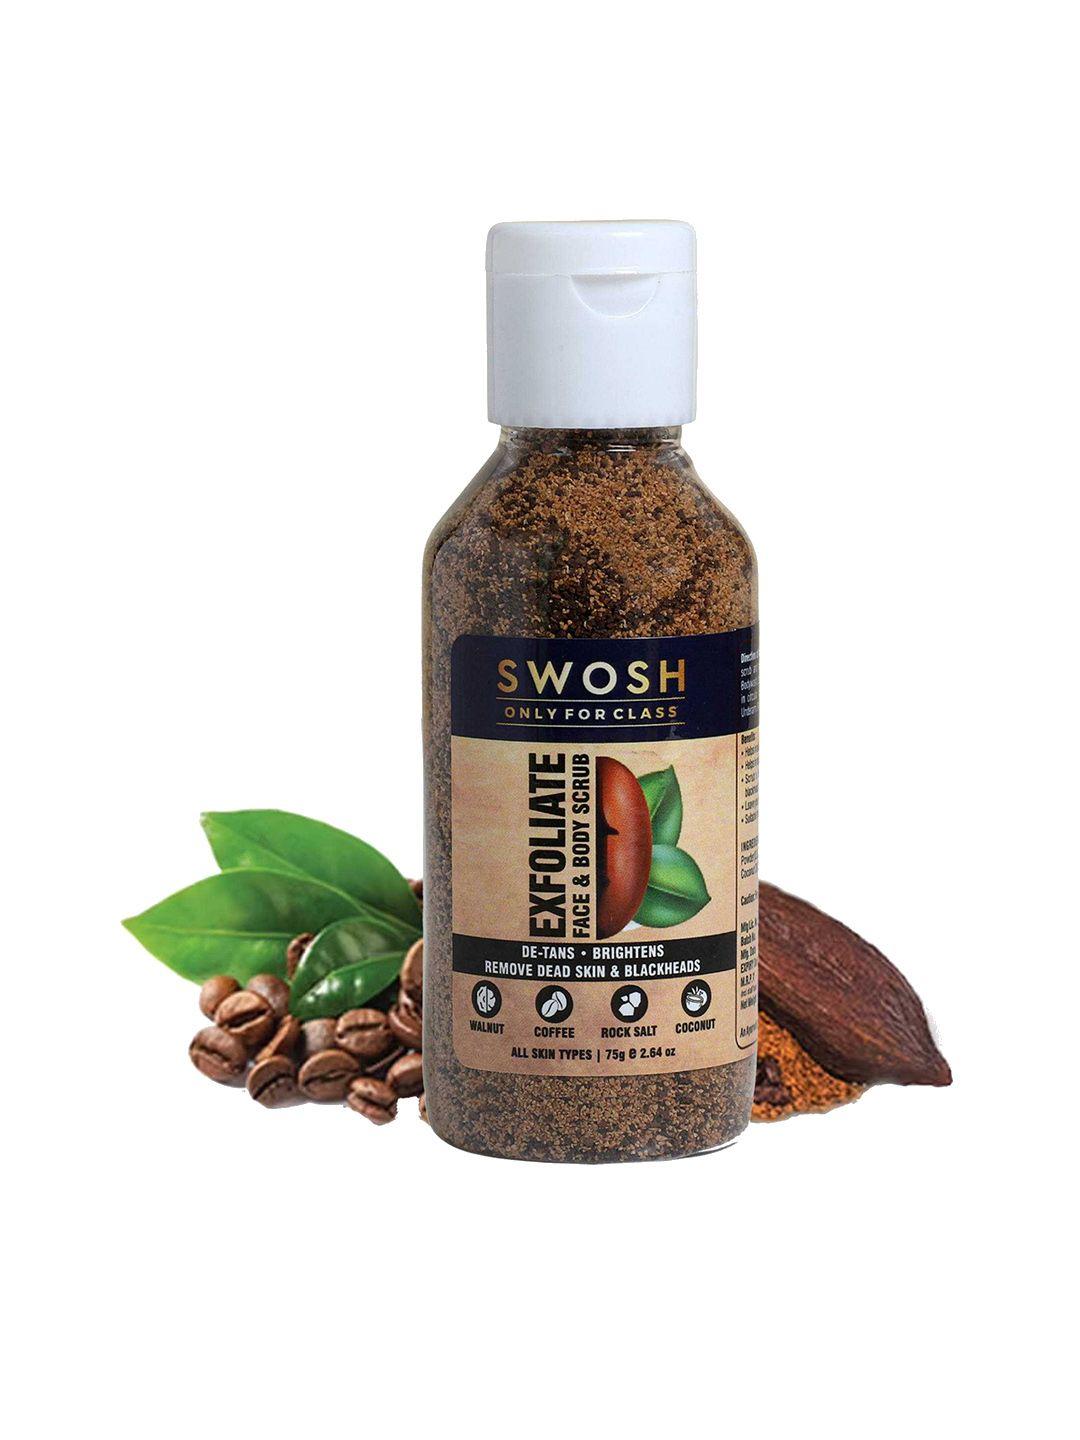 swosh natural & organic exfoliating coffee scrub for body and face tan removal - 75 gm